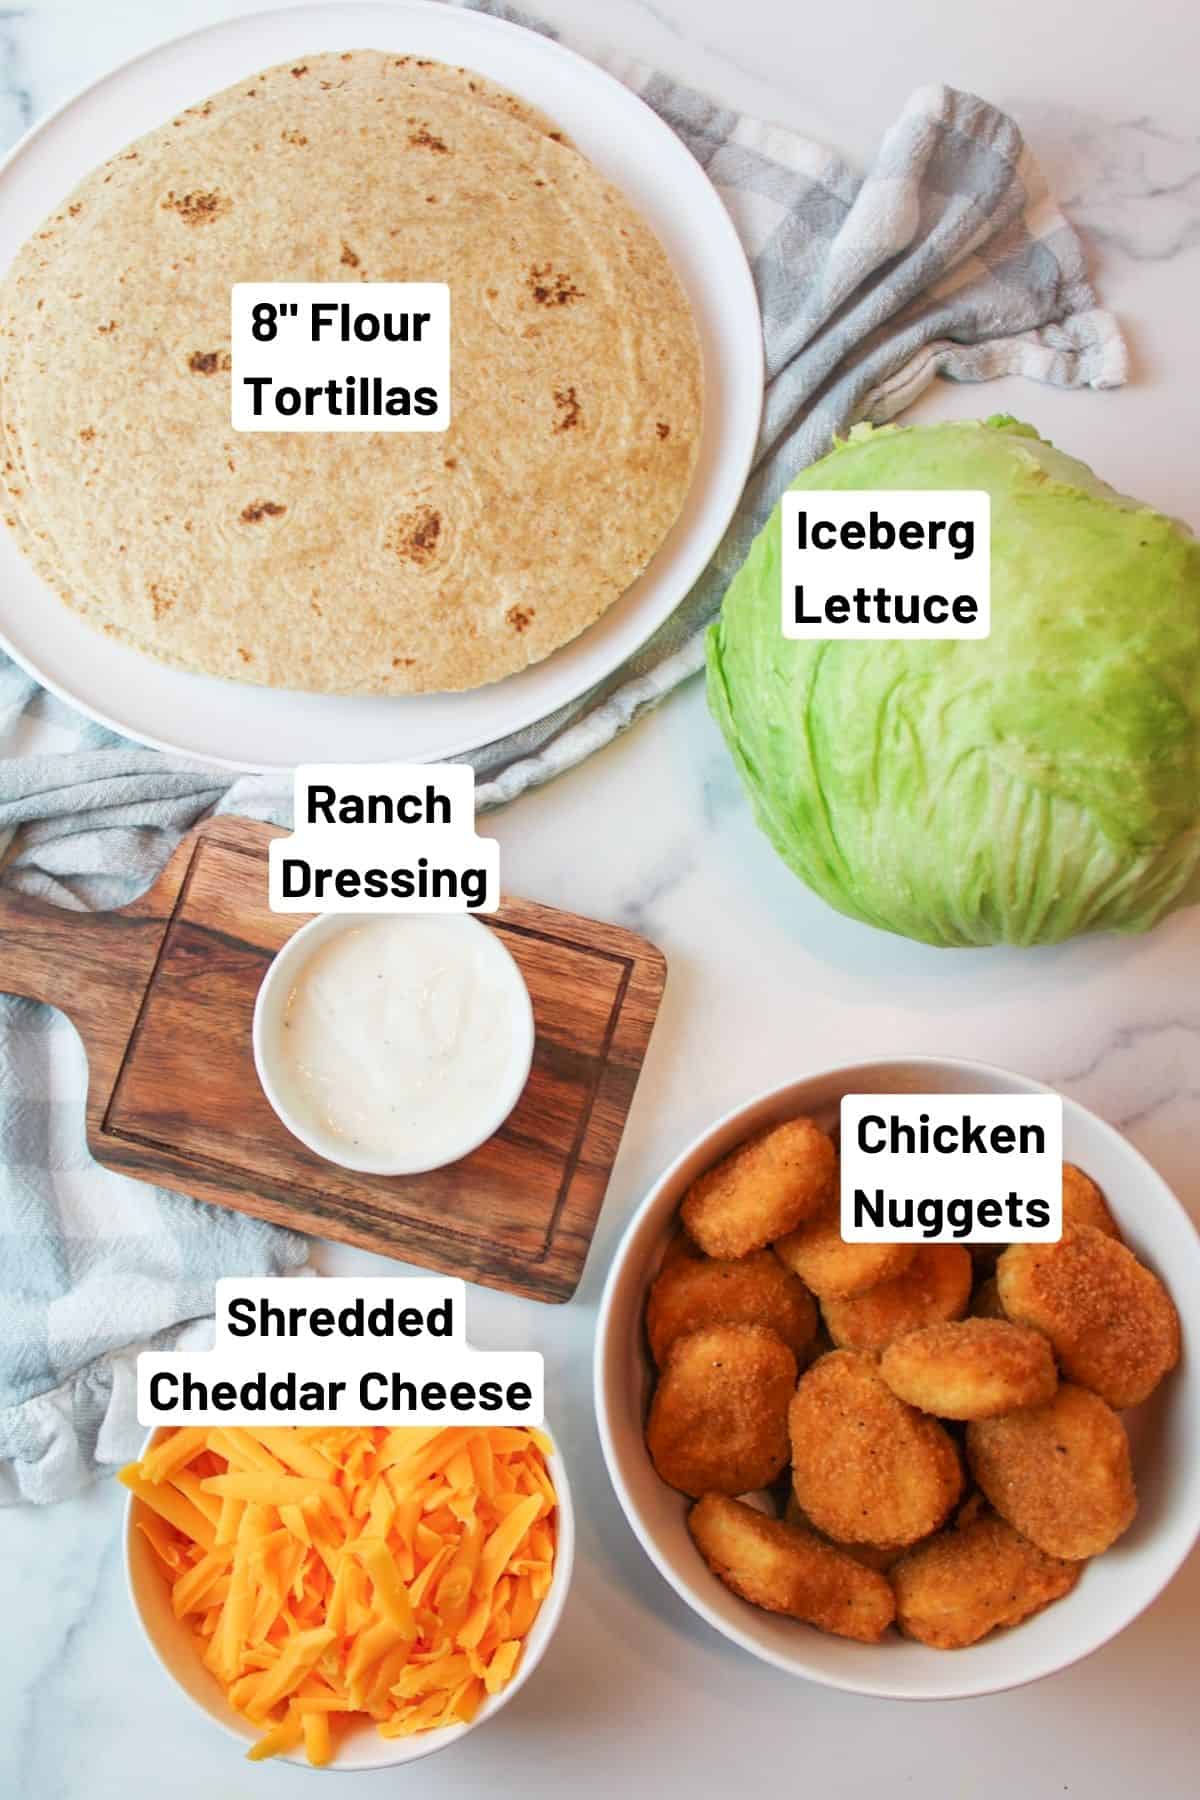 labeled ingredients needed to make chicken nugget wraps.